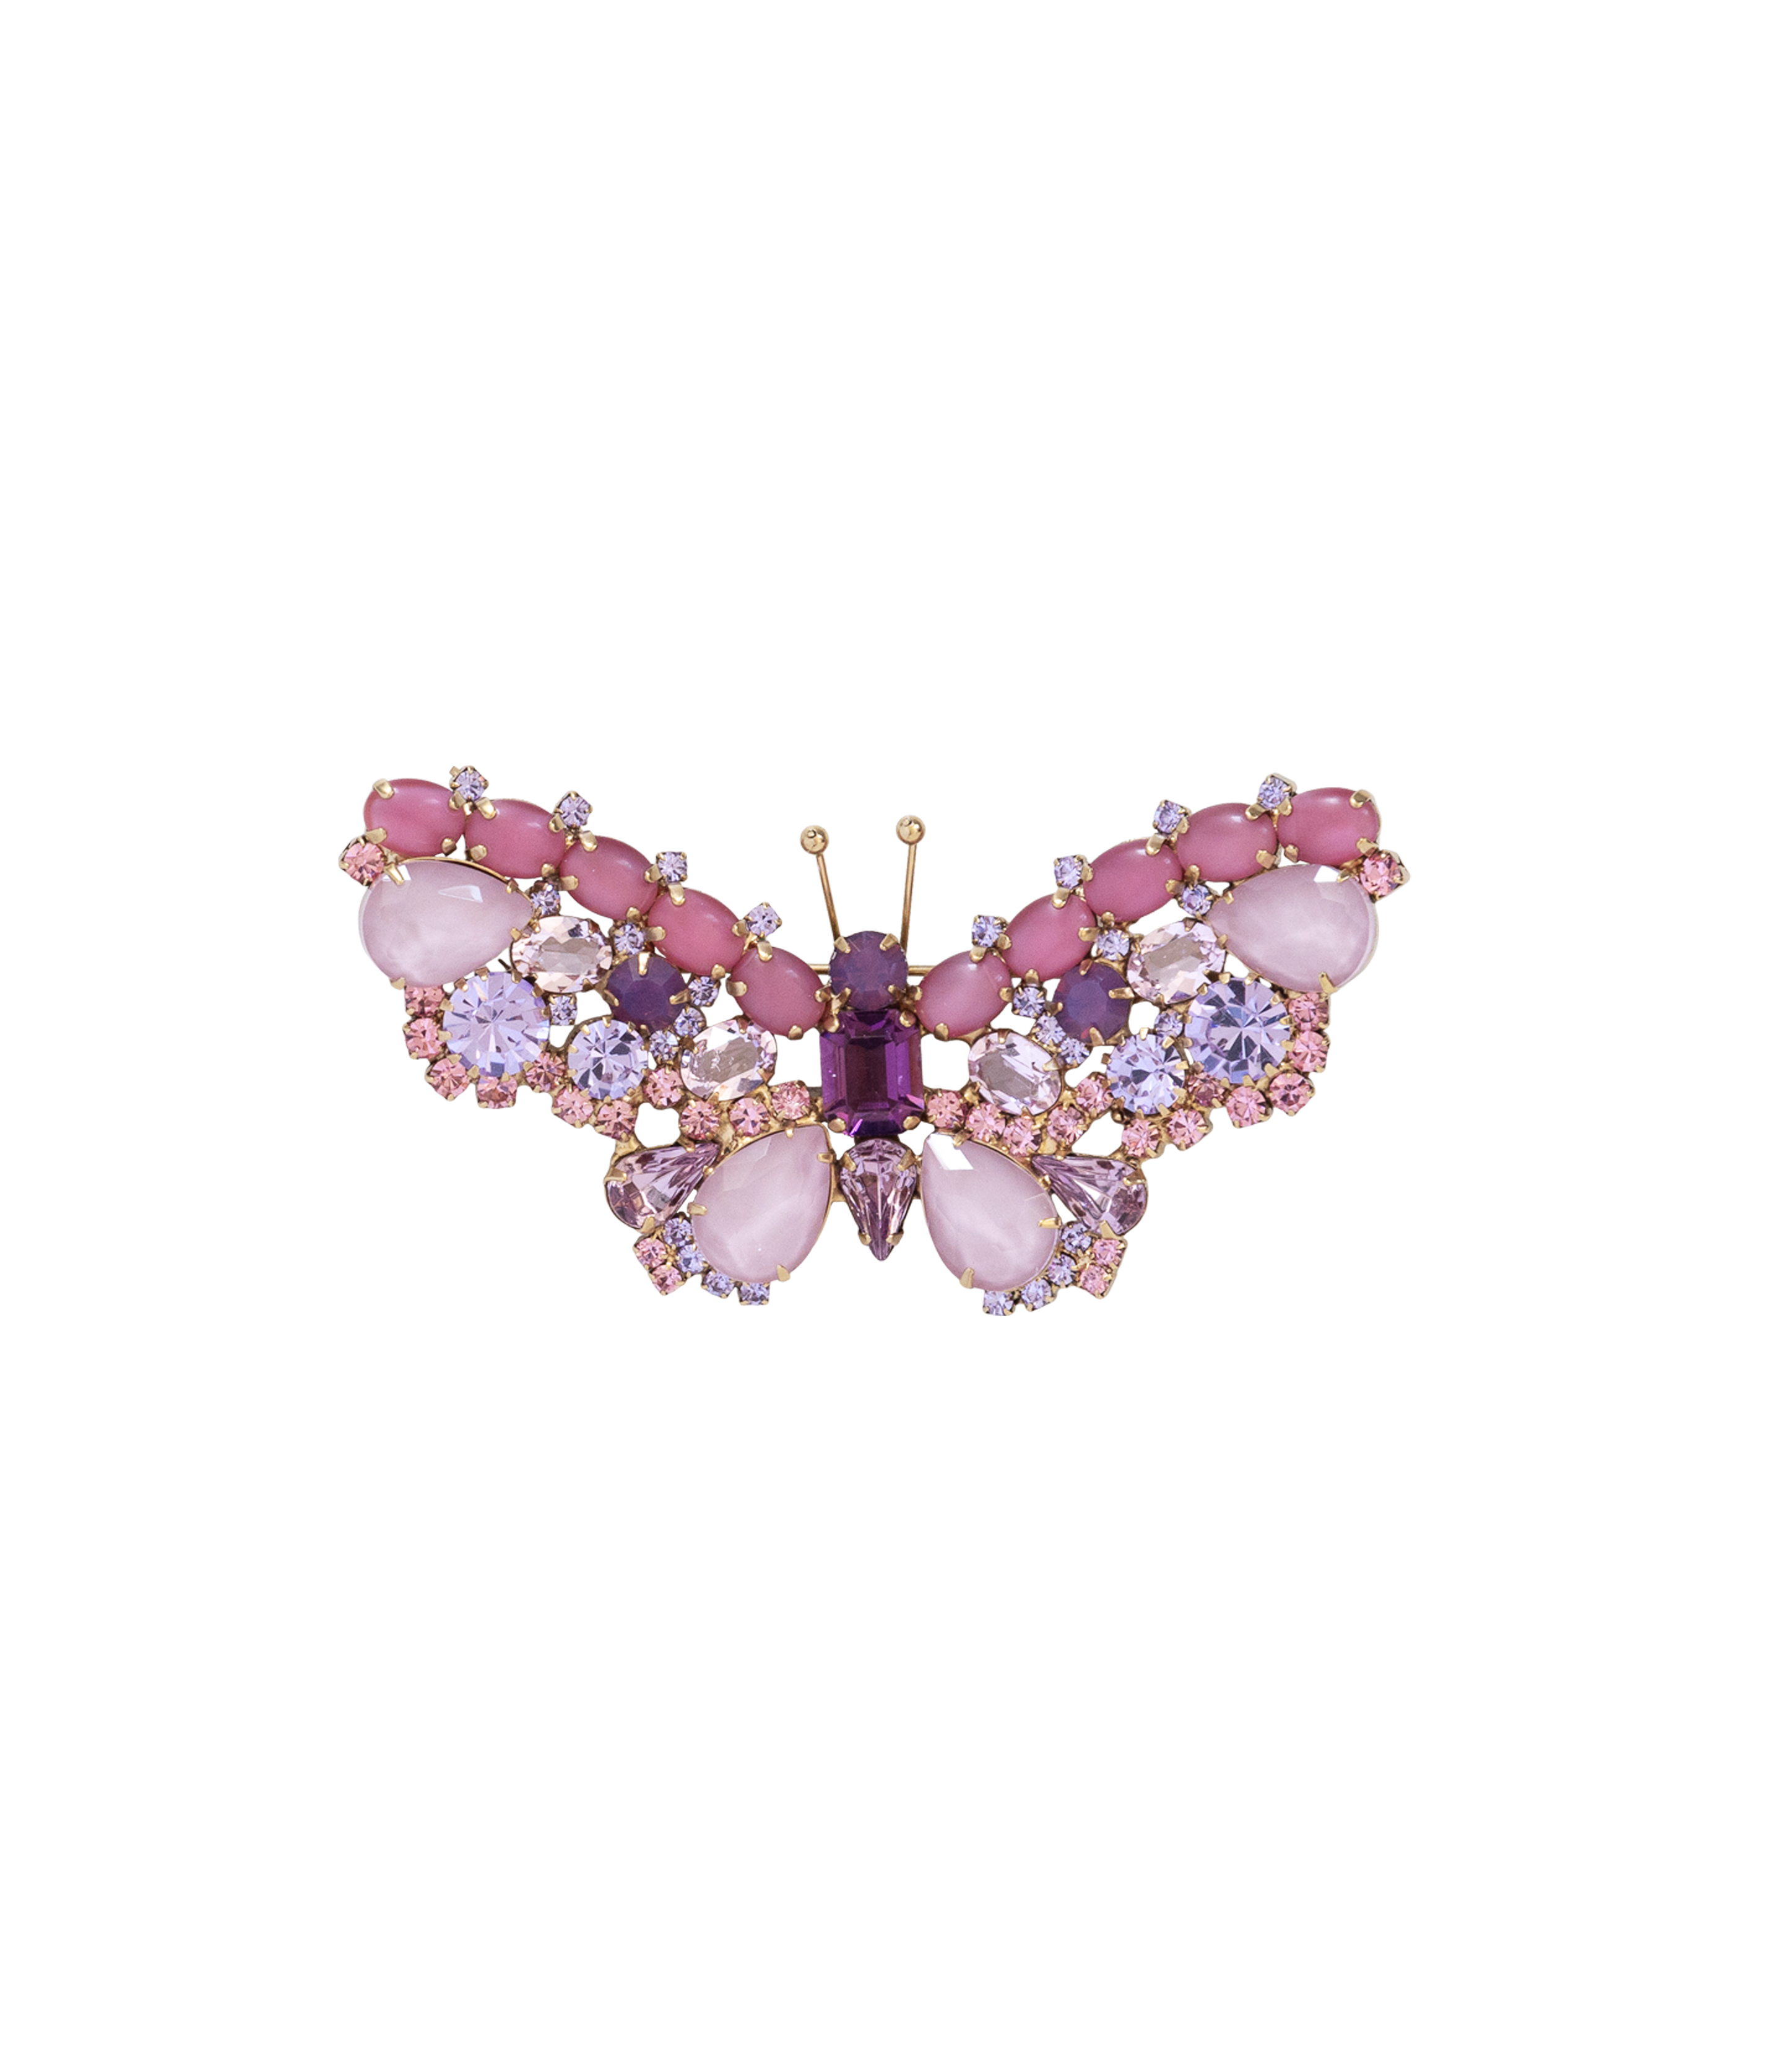 Small Butterfly in Dusty Rose / Violet / Amethyst